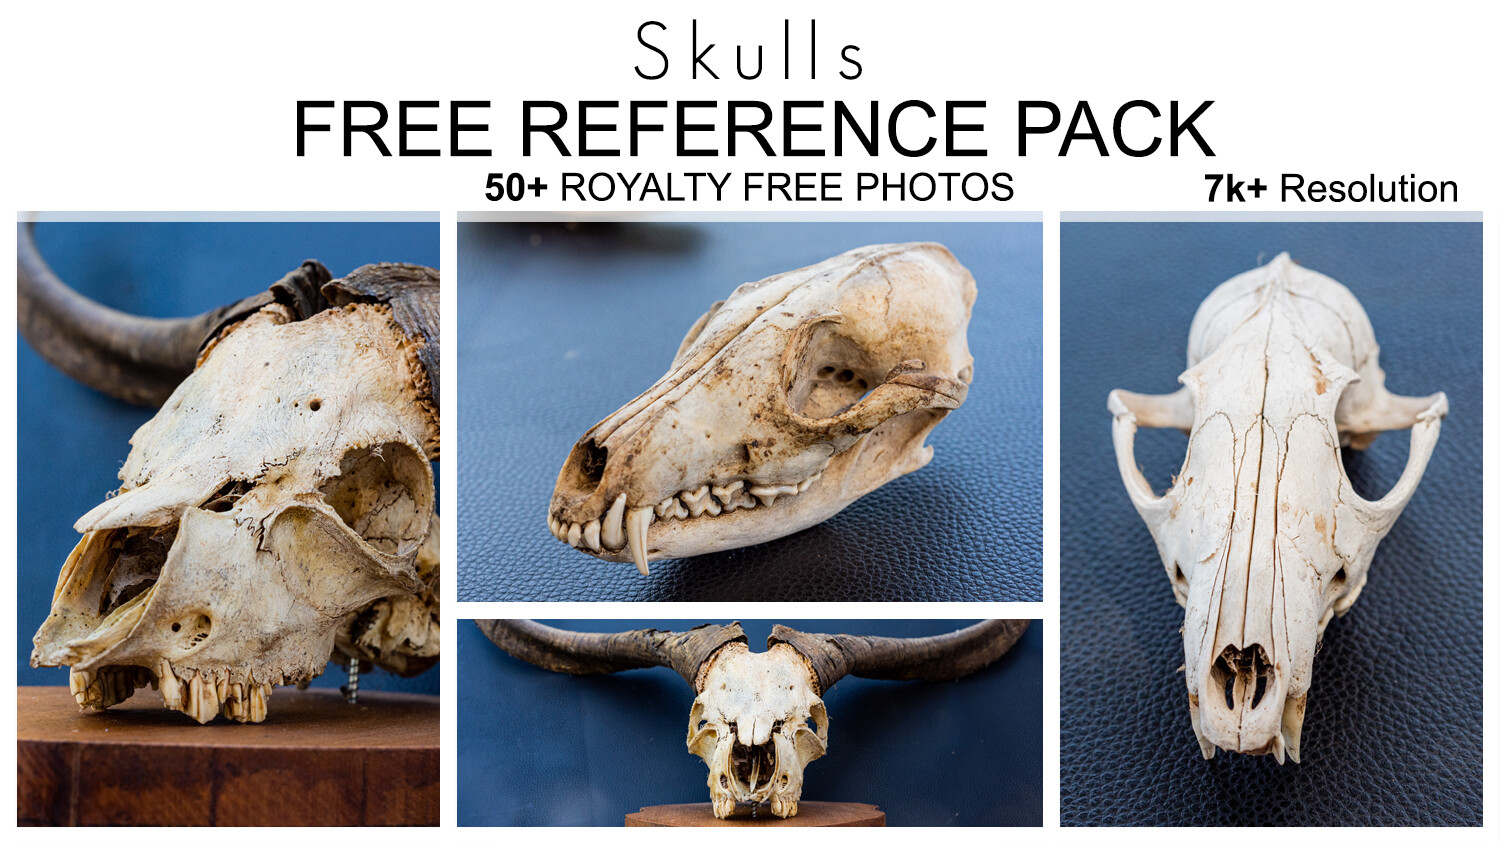 ArtStation - Free Reference Pack - Skulls - 50+ Royalty Free Photos |  Resources